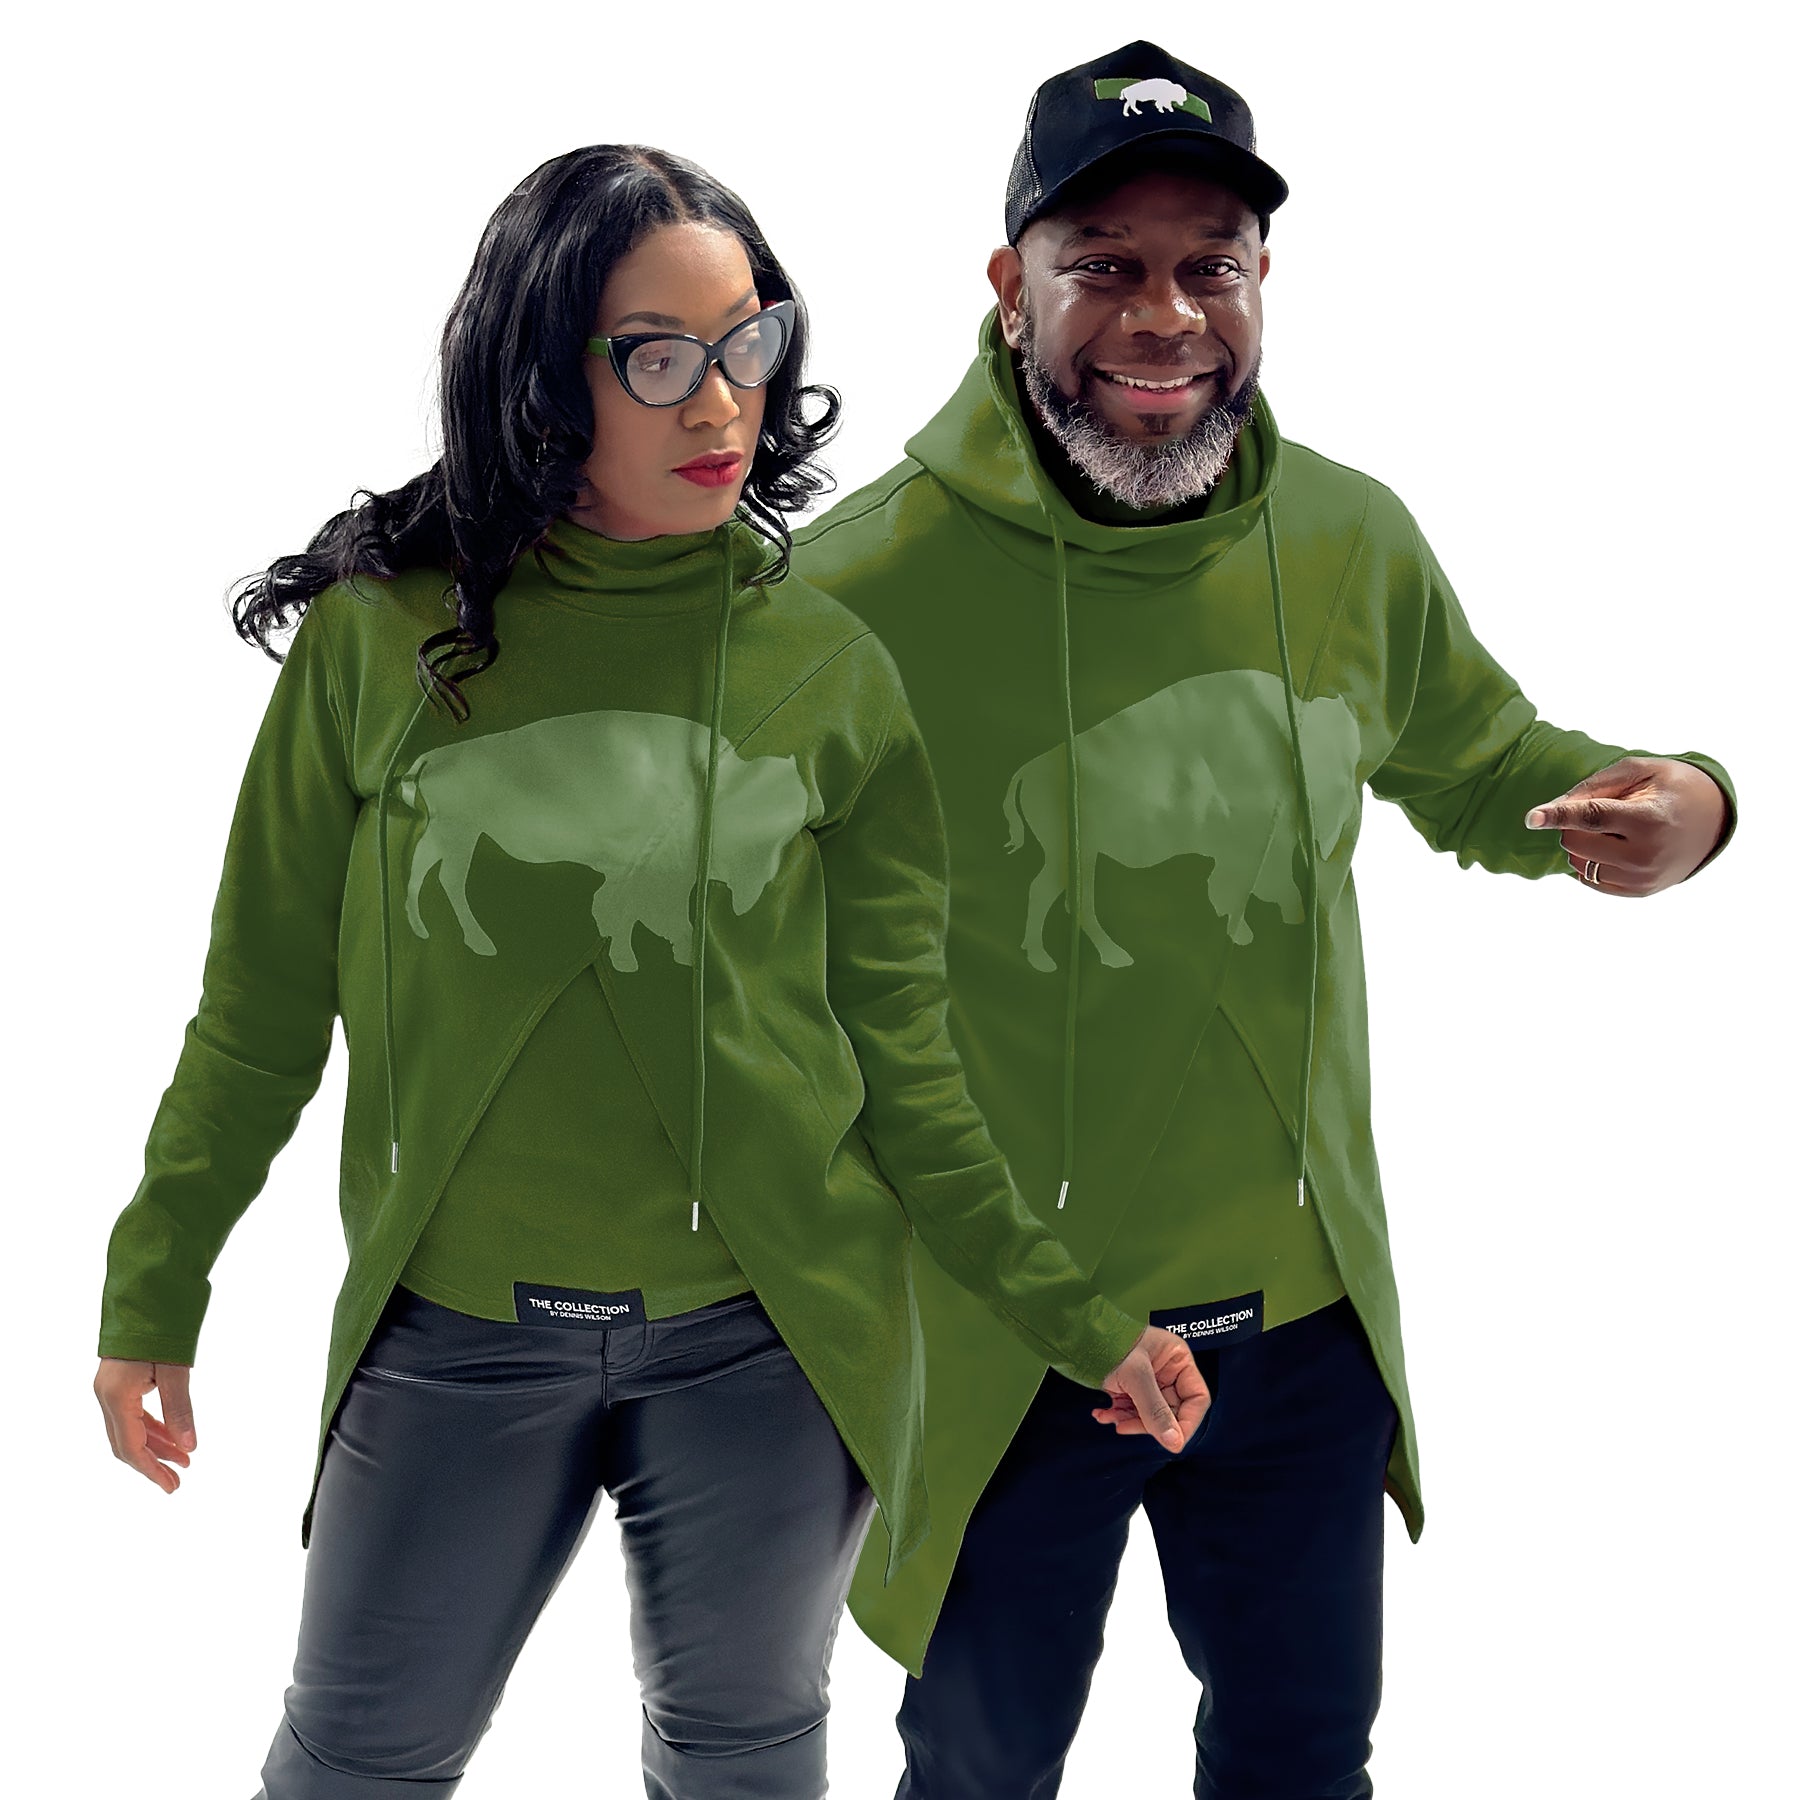 Crossover Bflo Hoodie- Green